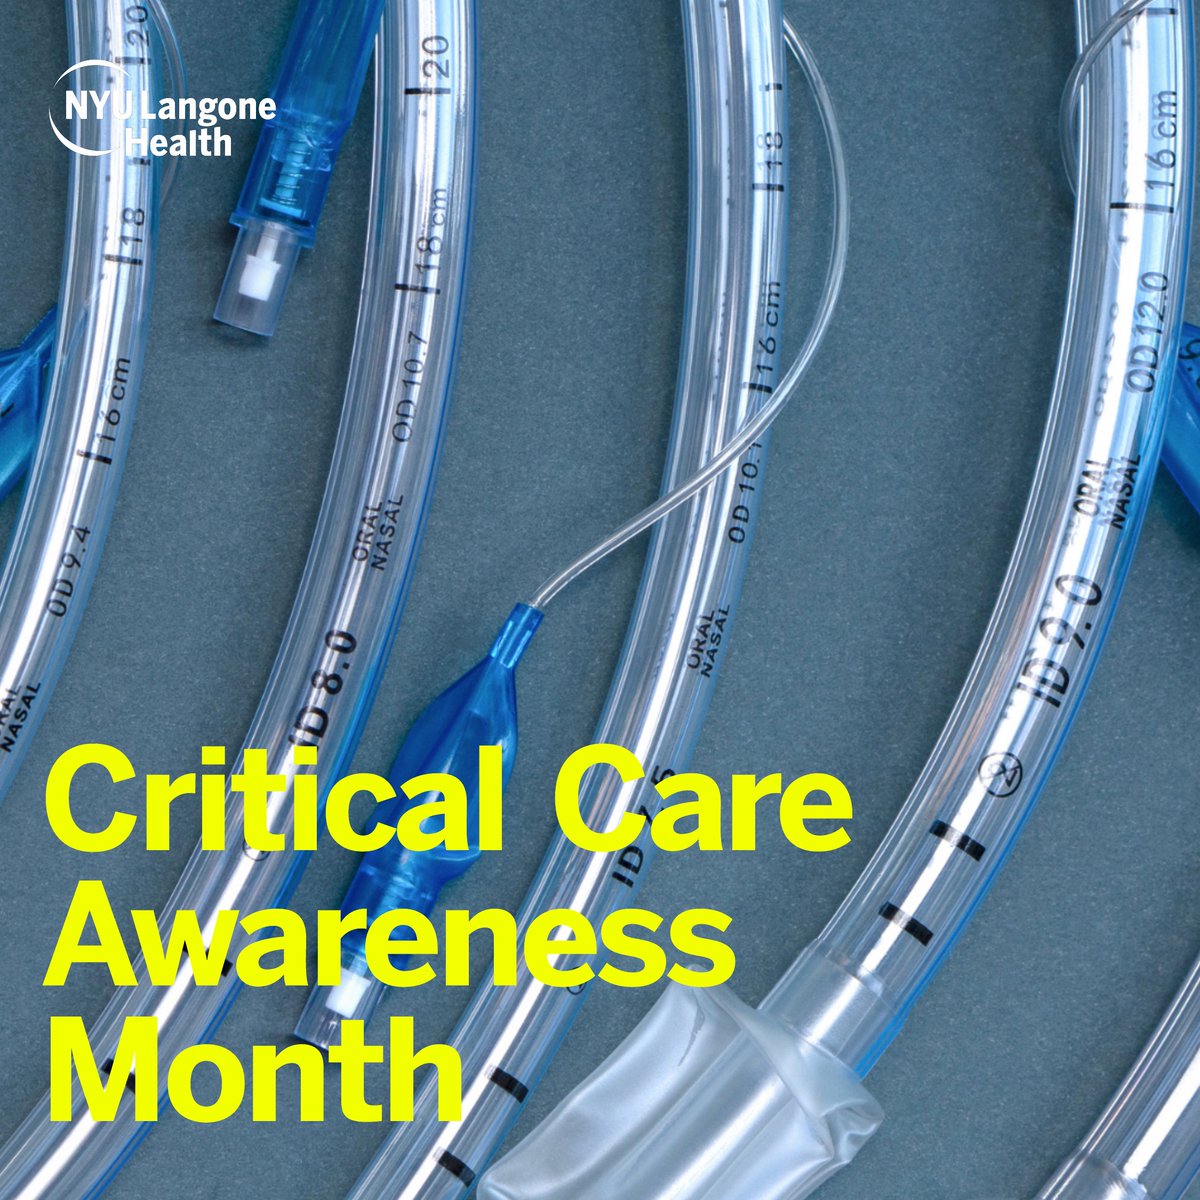 We're we're joining @SCCM and wearing blue today in recognition of Critical Care Awareness month and in support of #criticalcare clinicians worldwide! #NCCARM #CritCareMonth #WearBlue